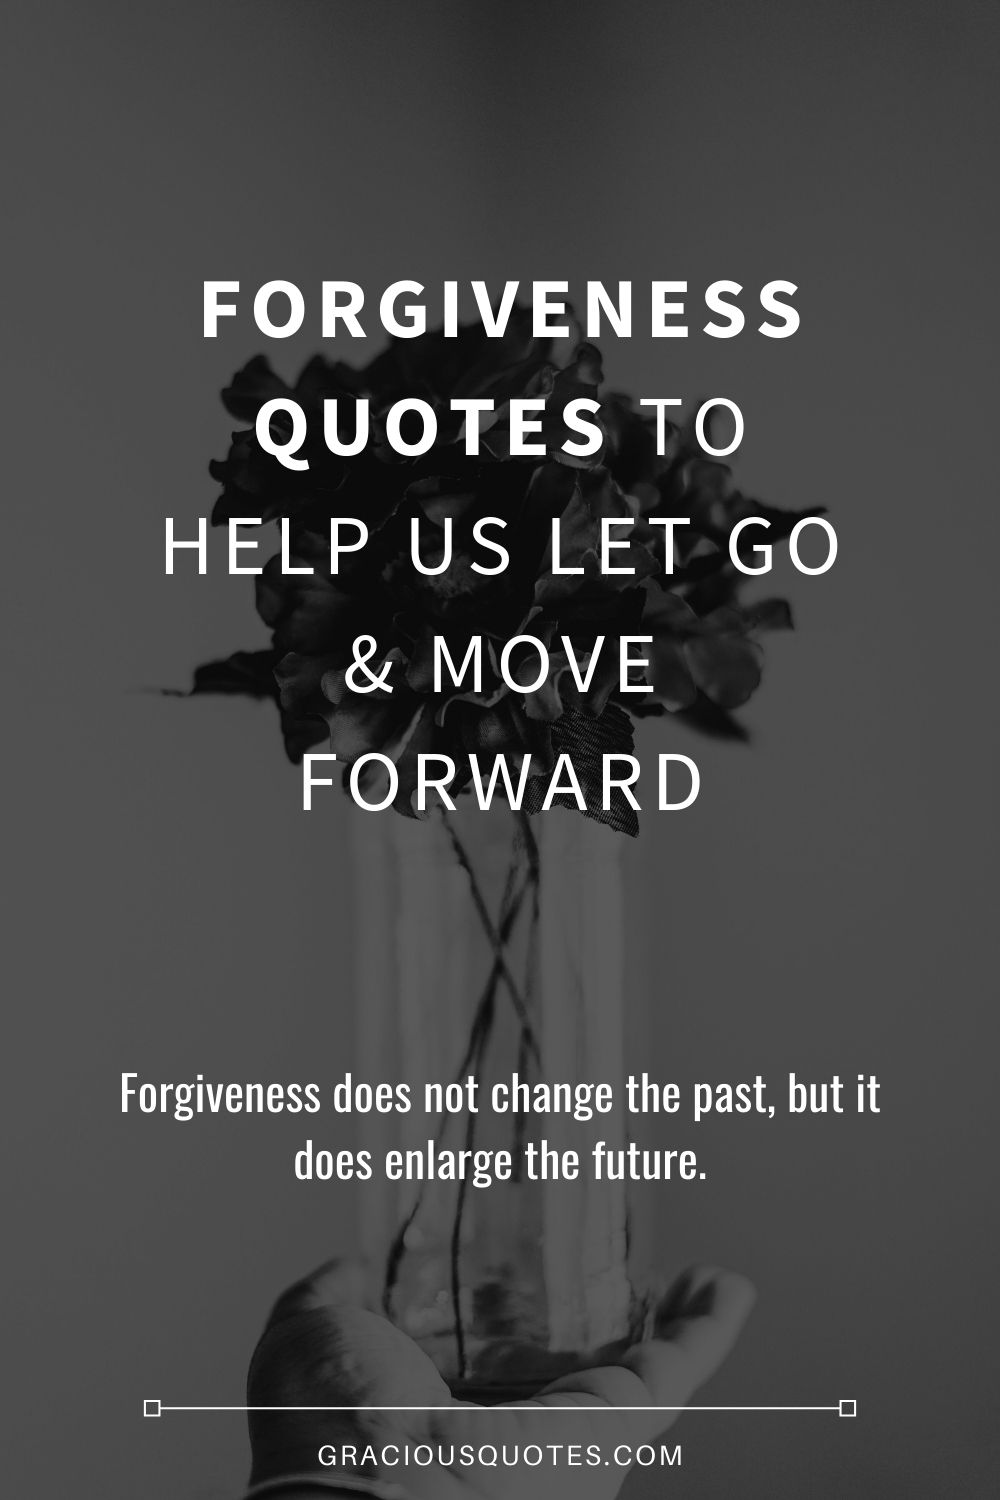 Forgiveness-Quotes-to-Help-Us-Let-Go-Move-Forward-Gracious-Quotes